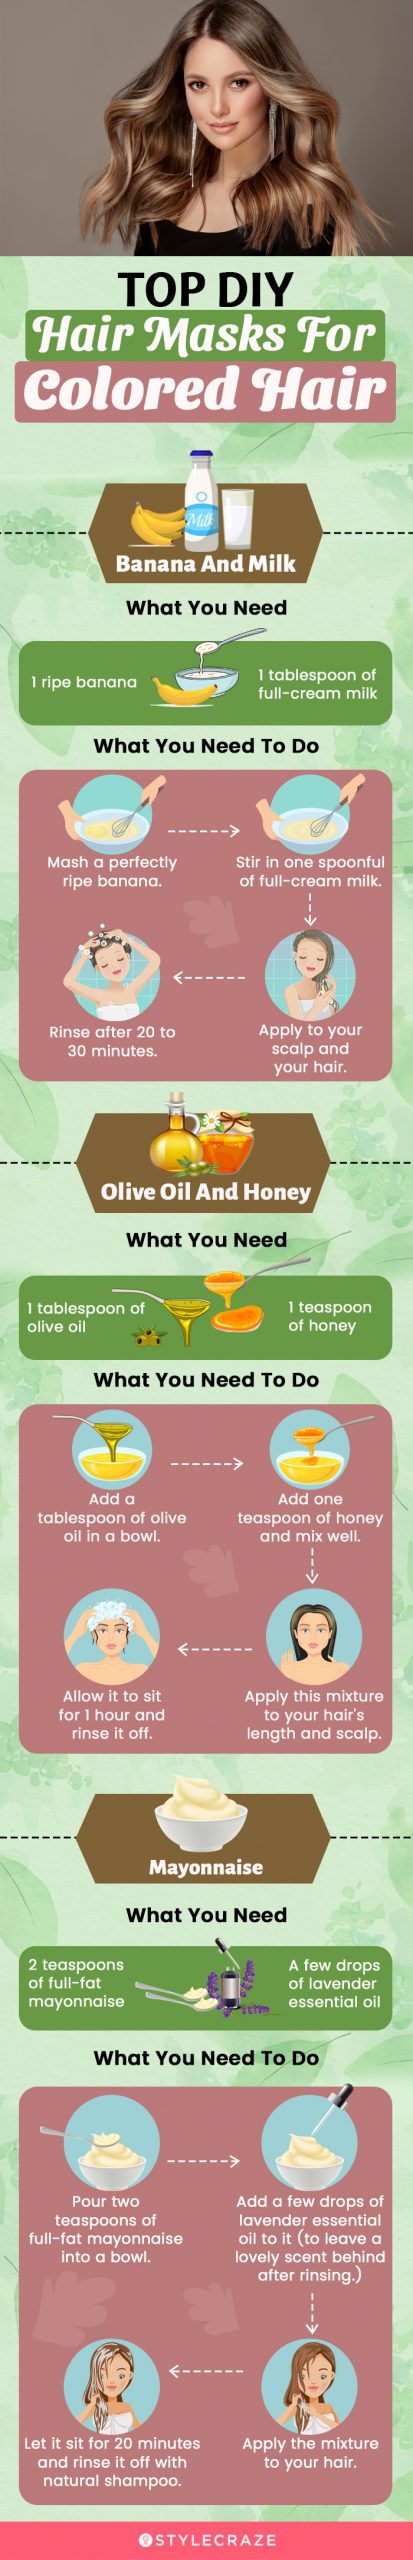 top diy hair masks for colored hair [infographic]